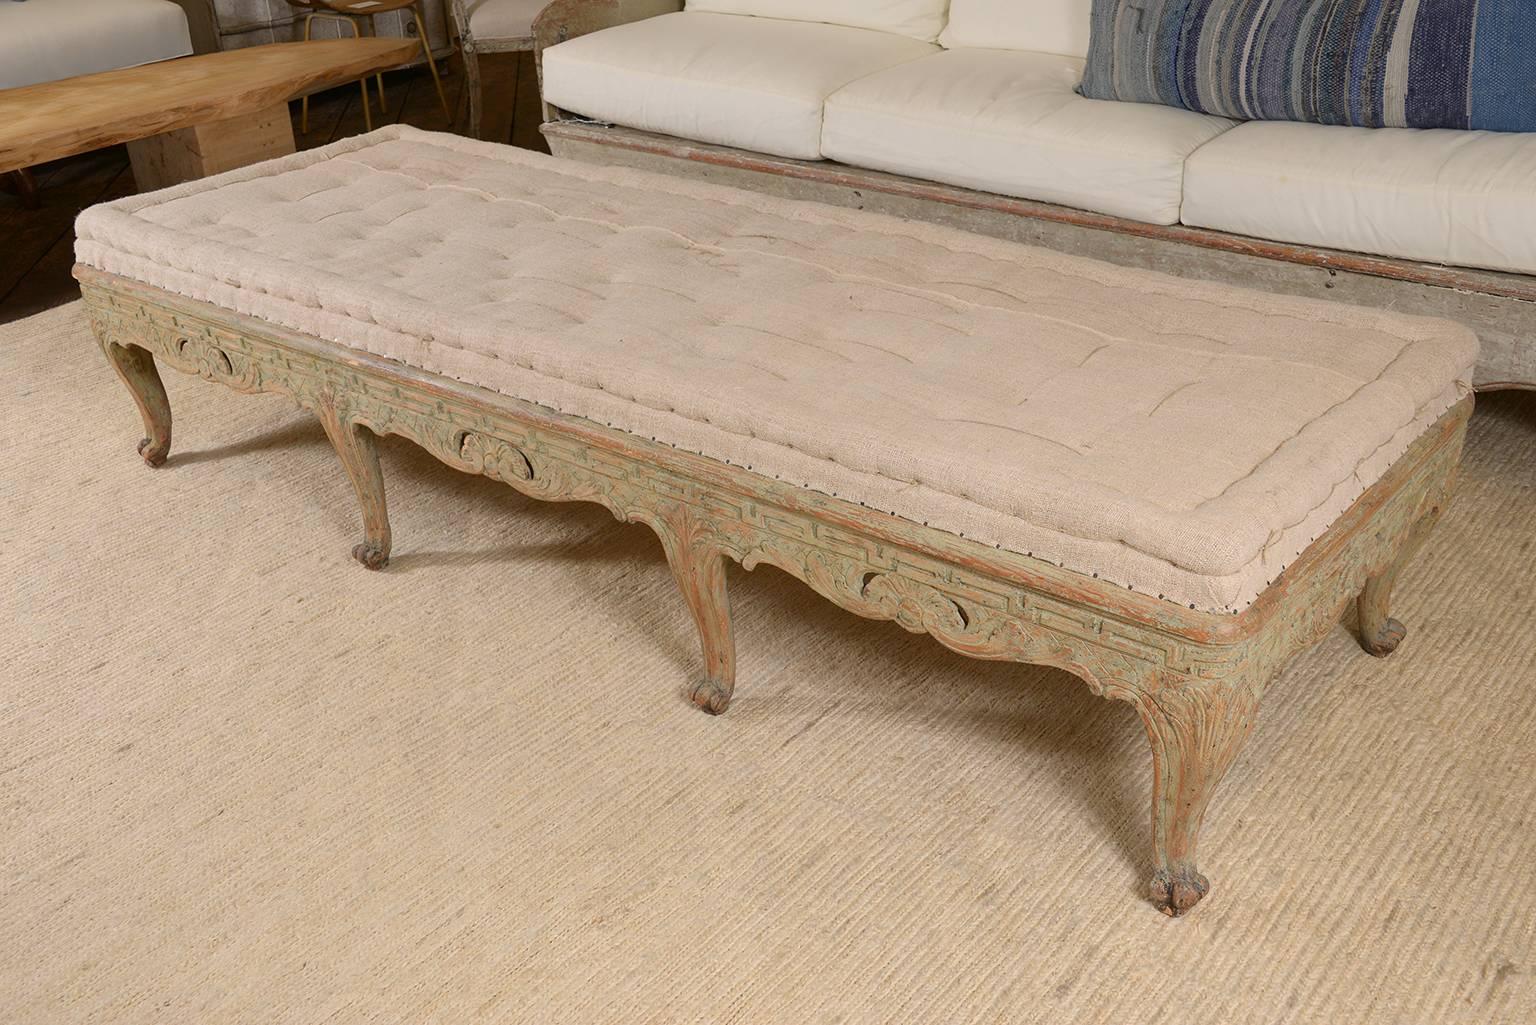 Handsome Swedish Baroque painted bench upholstered in antique linen, amazing large scale.